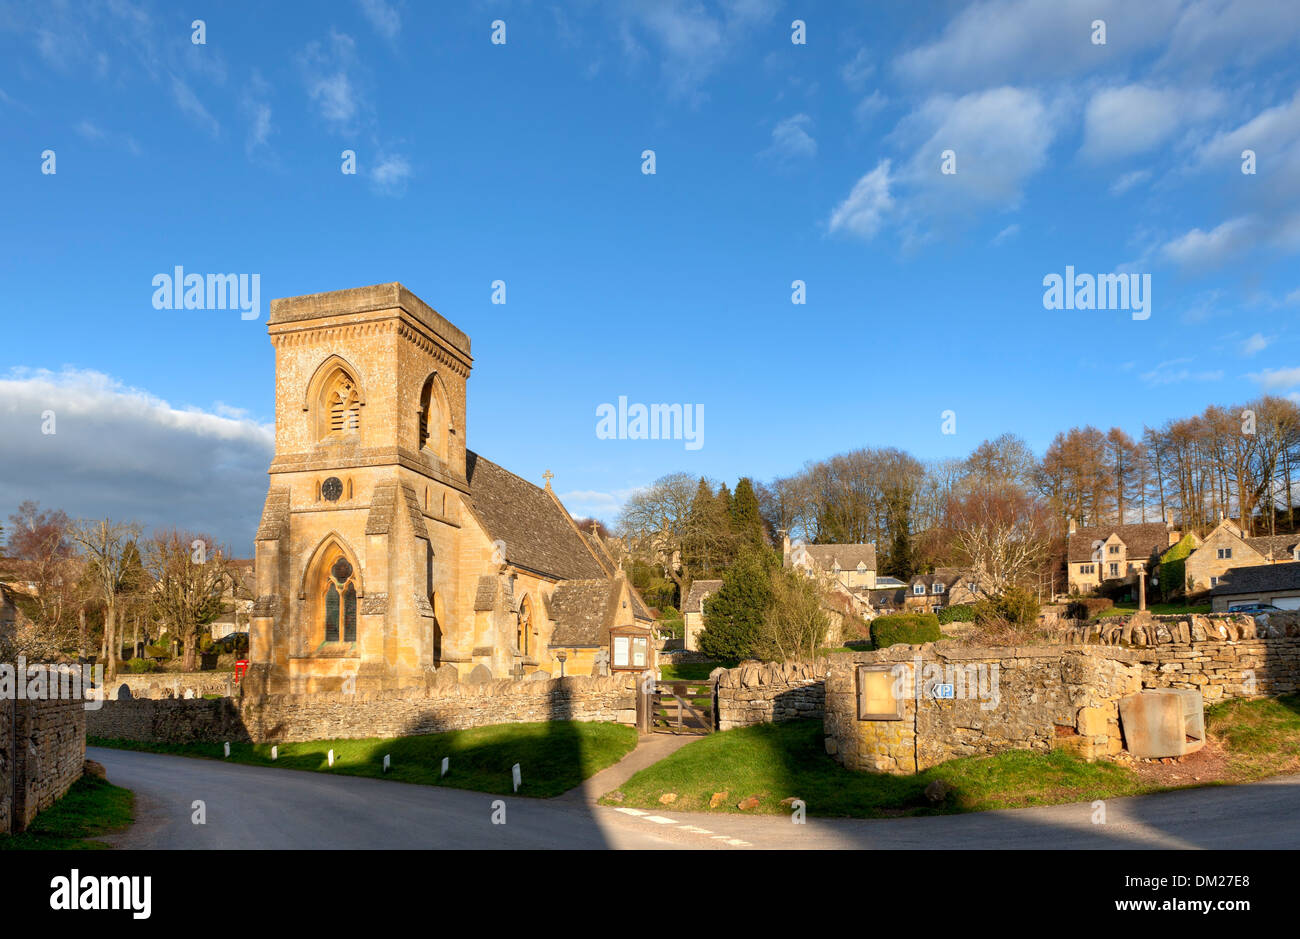 The pretty Cotswold church at Snowshill, Gloucestershire, England. Stock Photo